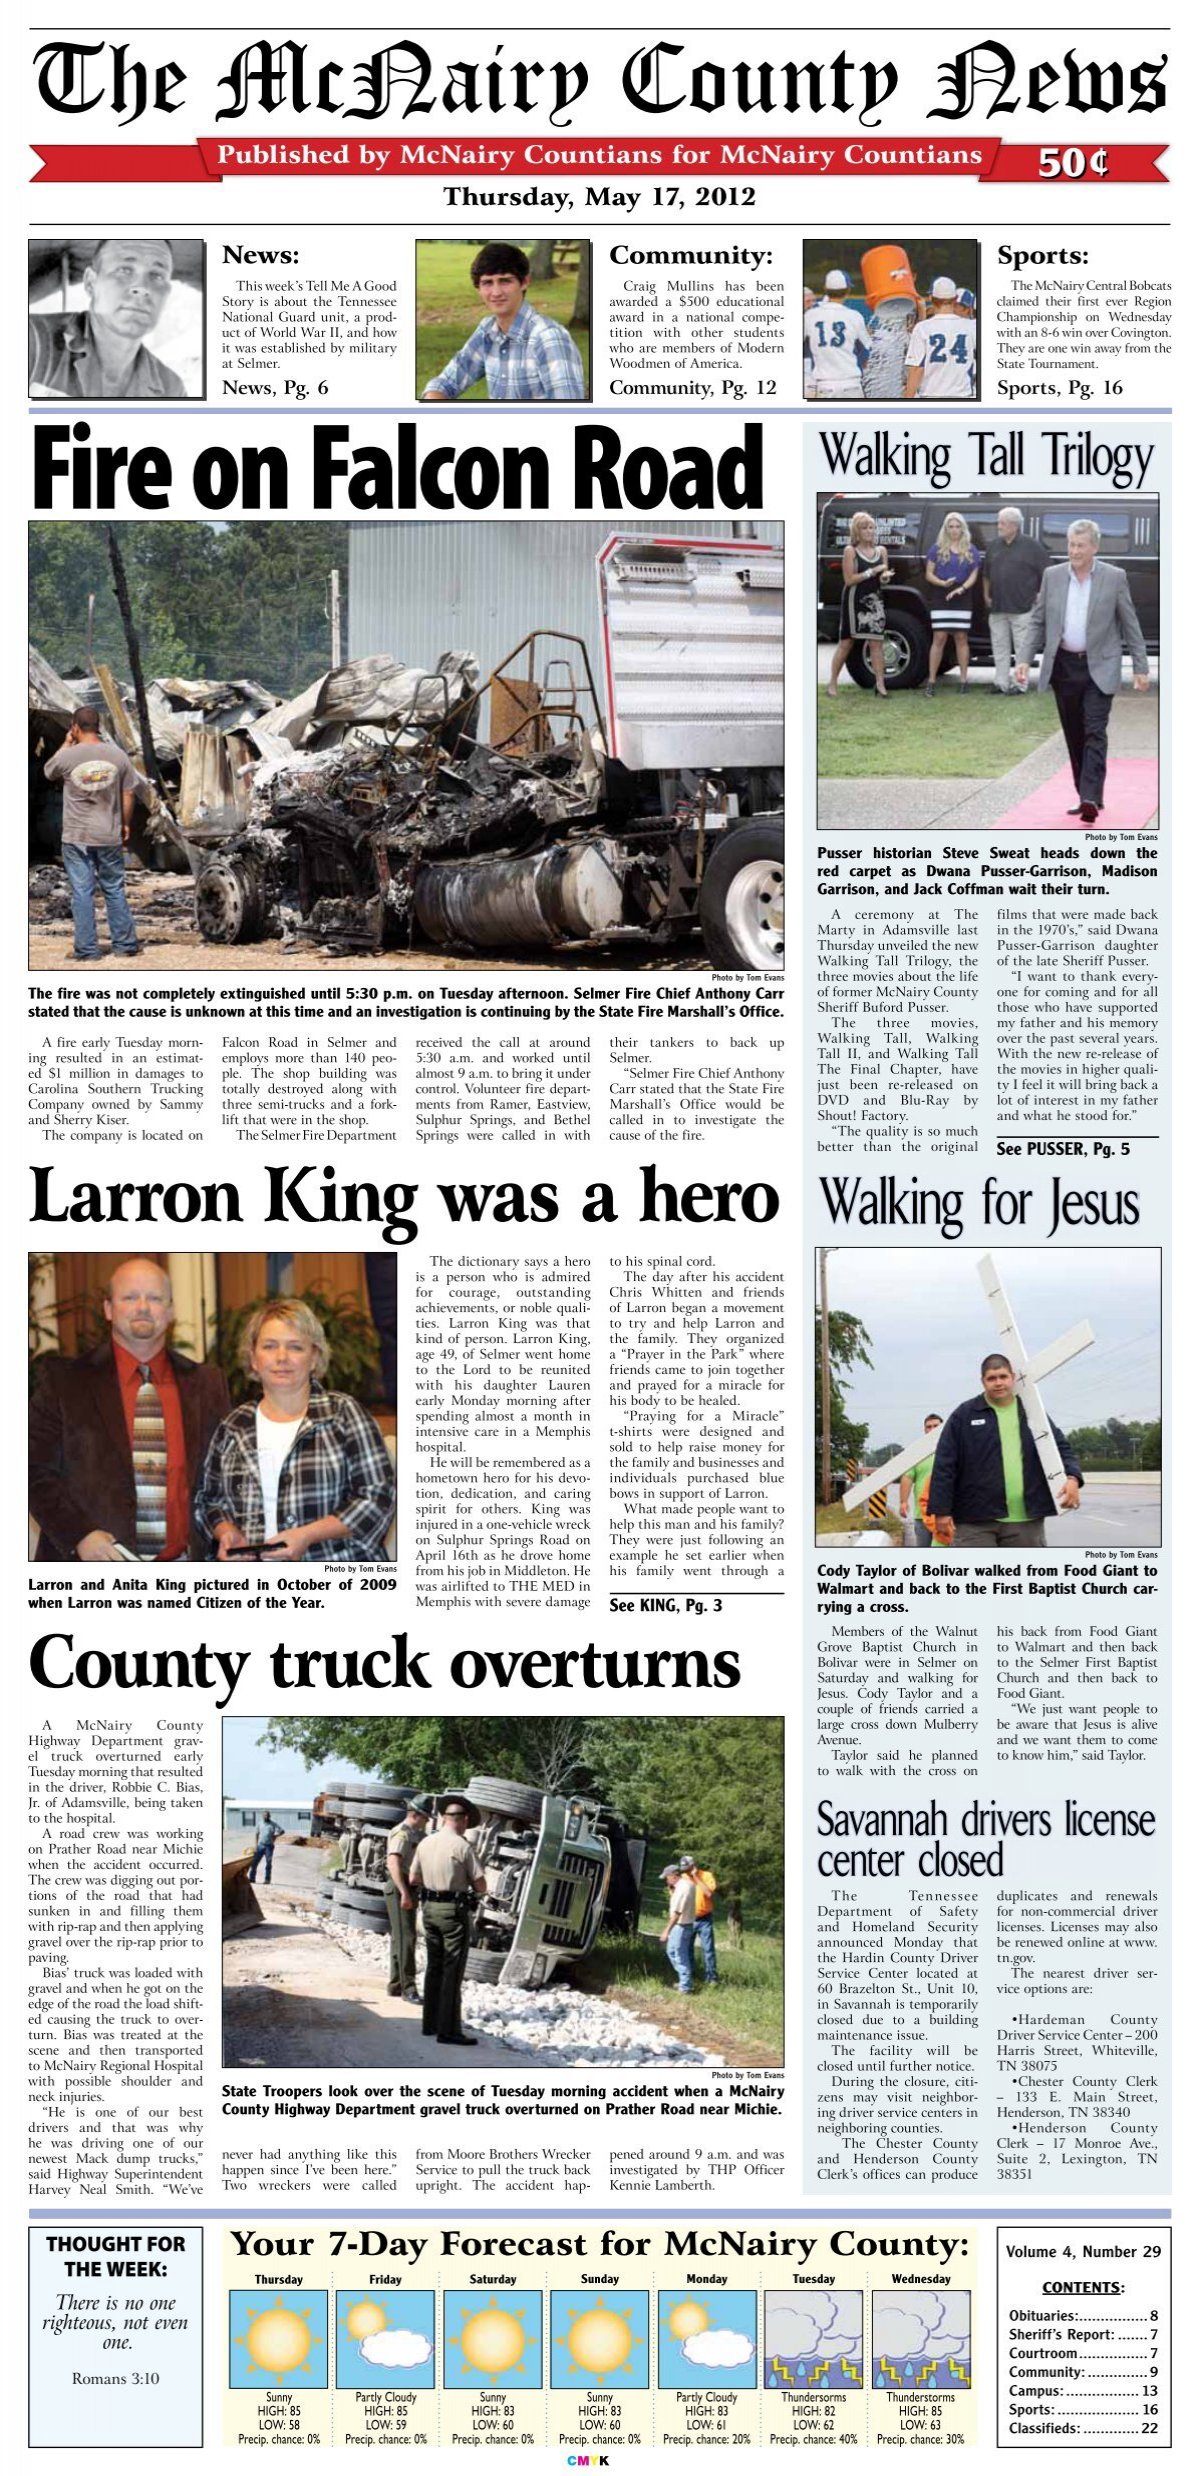 The McNairy County News